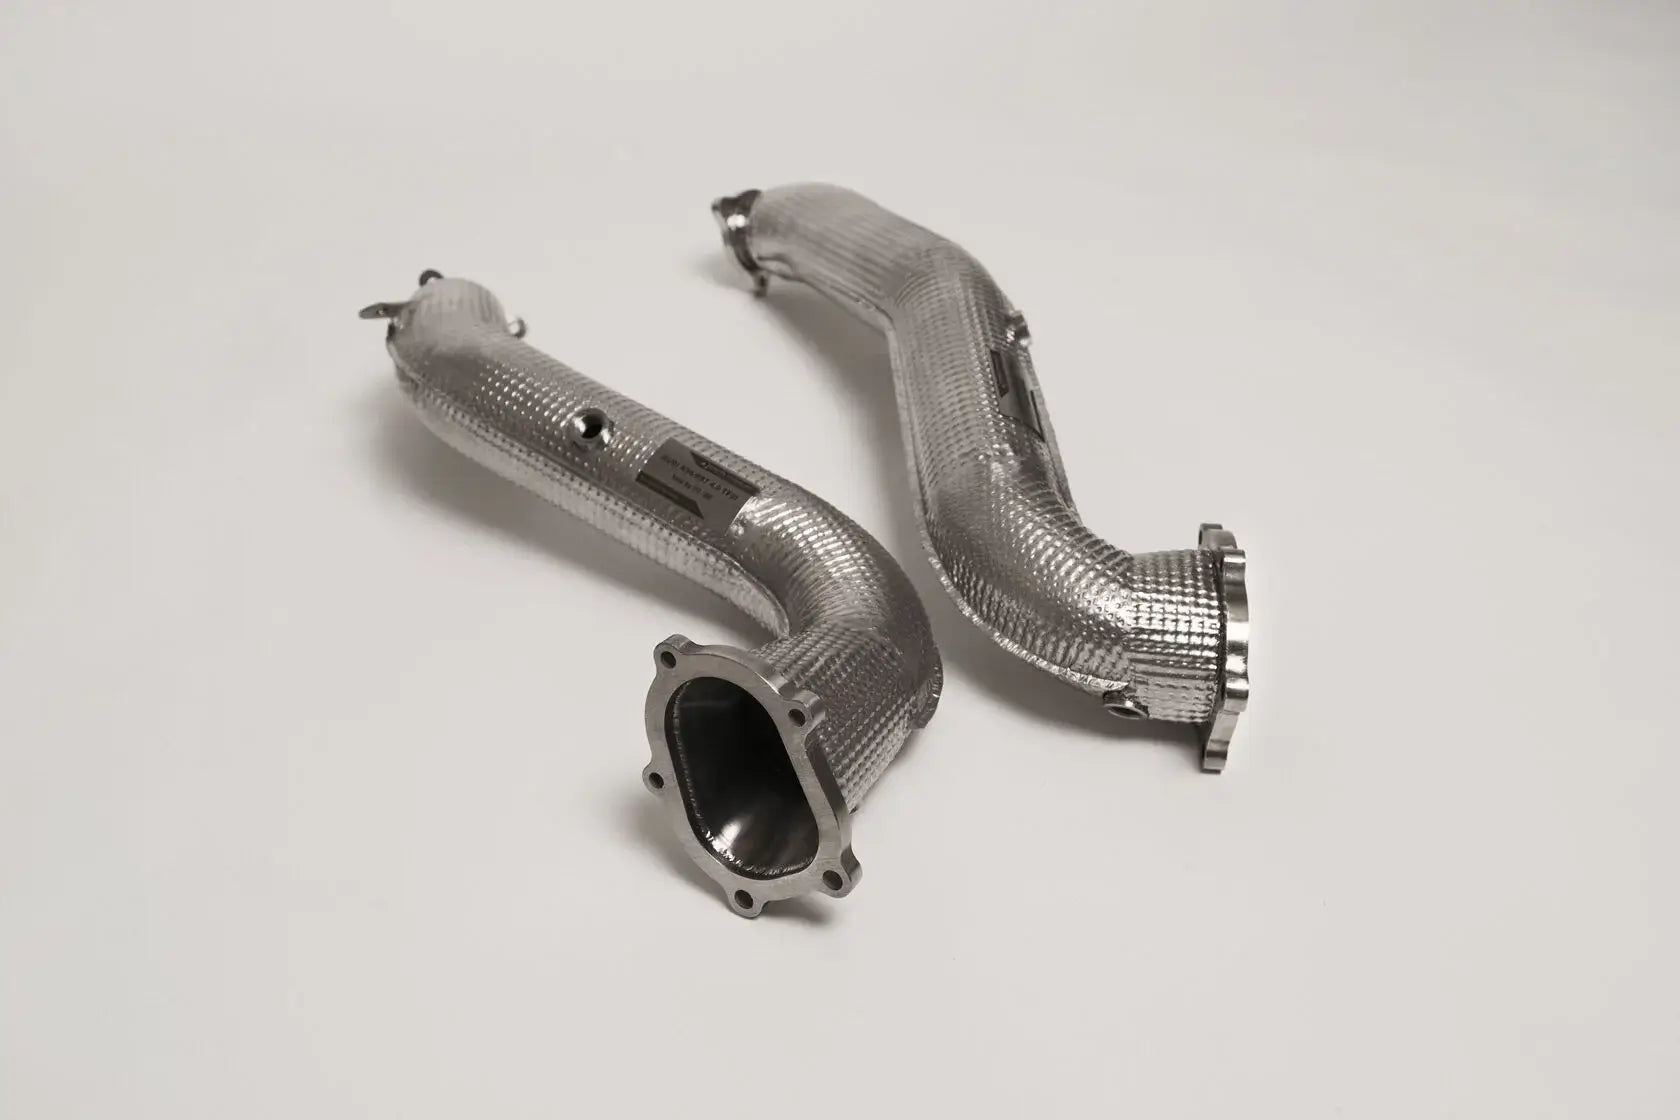 DEIKIN 10-AUDI.RS6.C7-DP Downpipe for AUDI RS6 (C7) without HeatShield Photo-1 